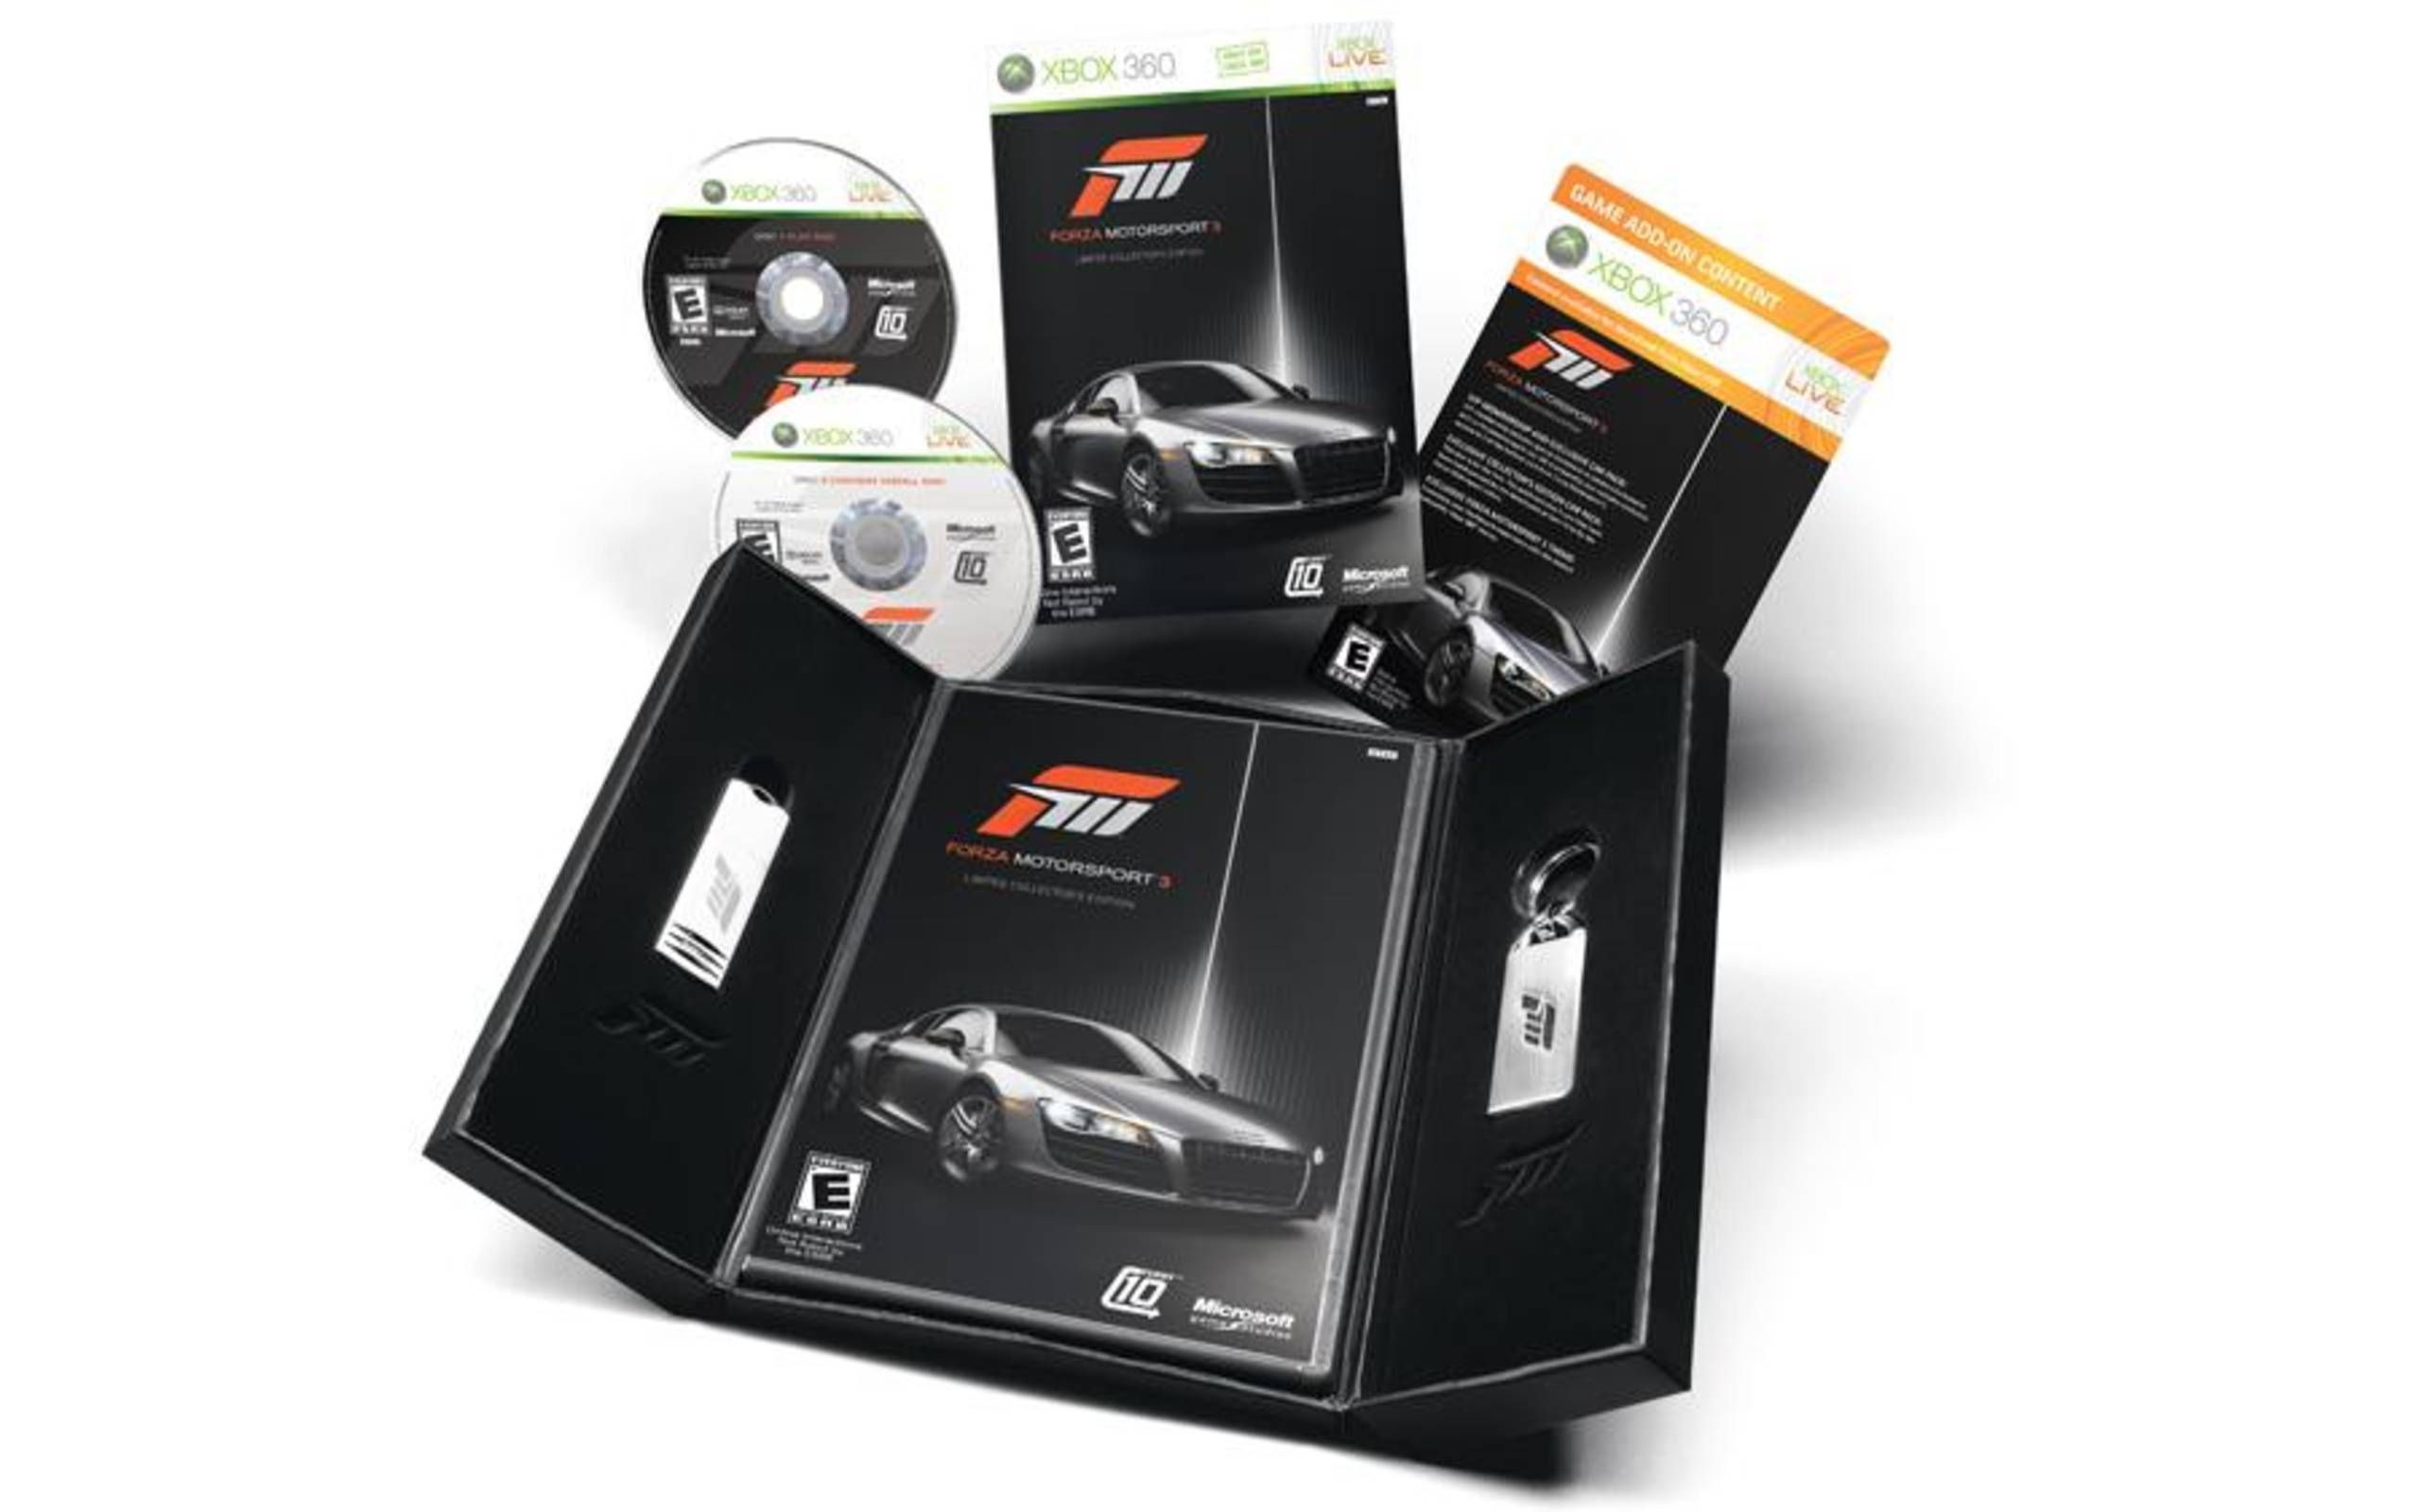 Forza Motorsport 3 - Limited Collectors Edition (Xbox 360, 2009) Tested